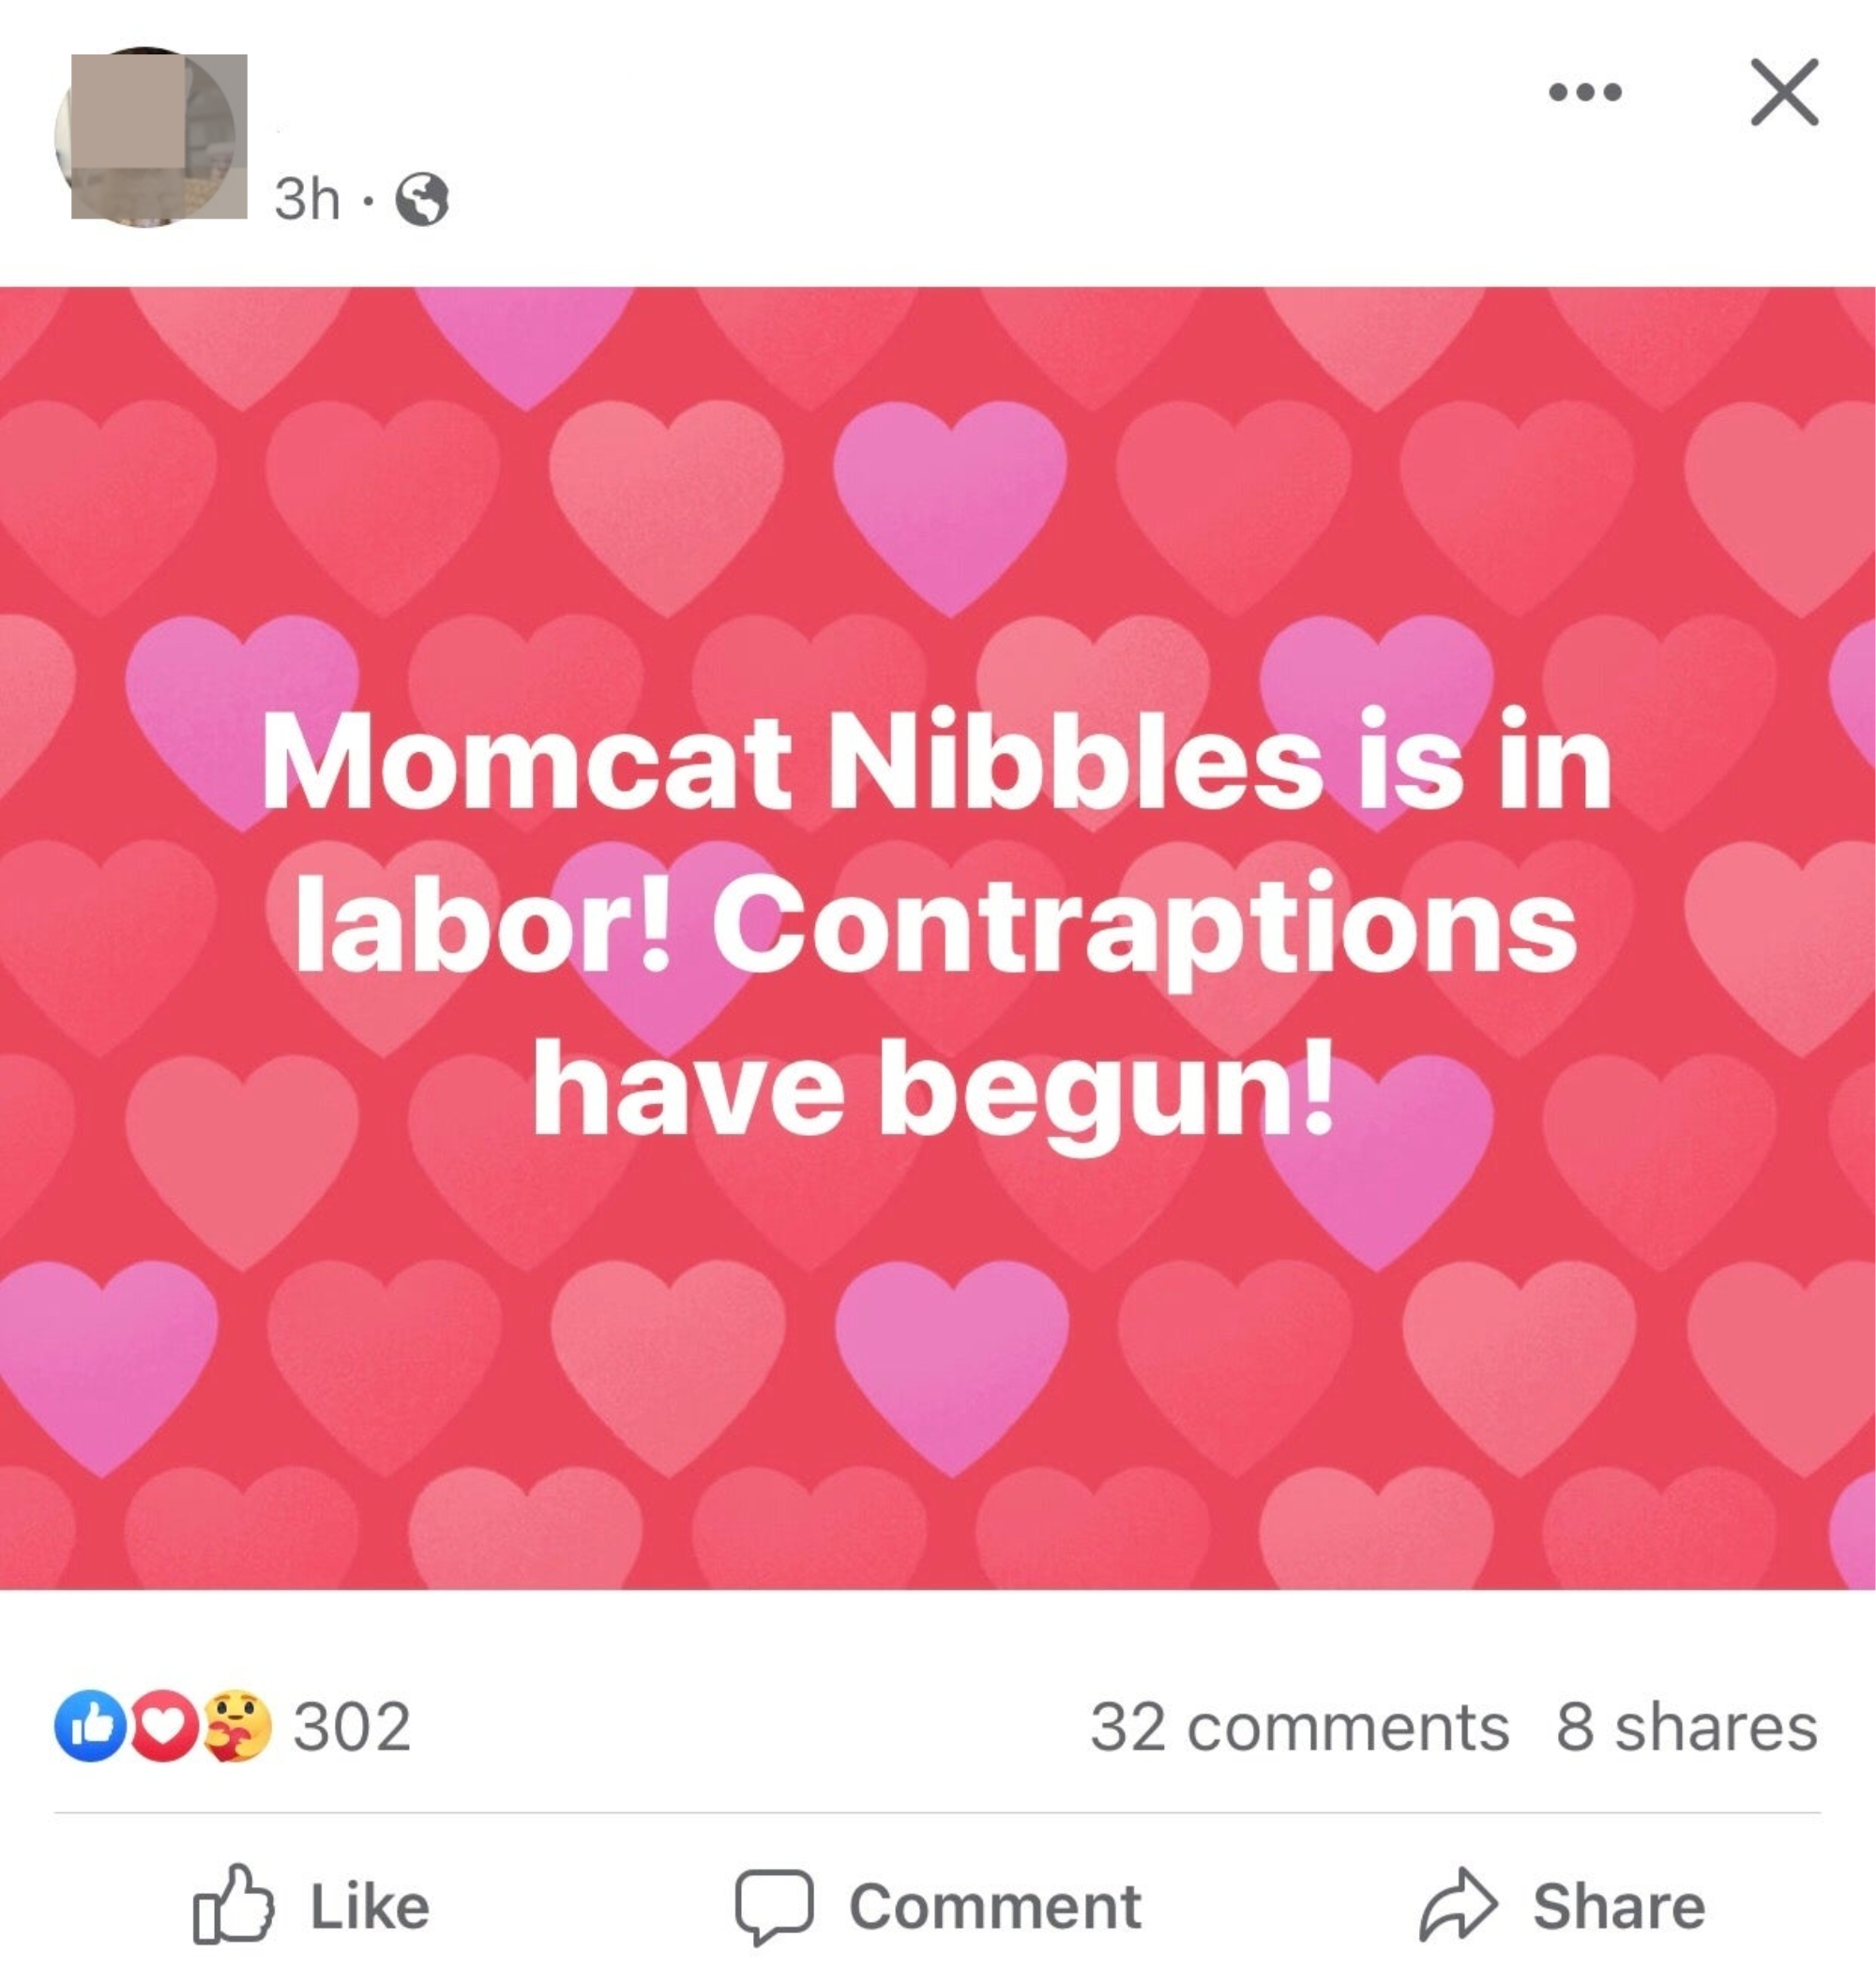 &quot;Momcat Nibbles is in labor! Contraptions have begun!&quot;